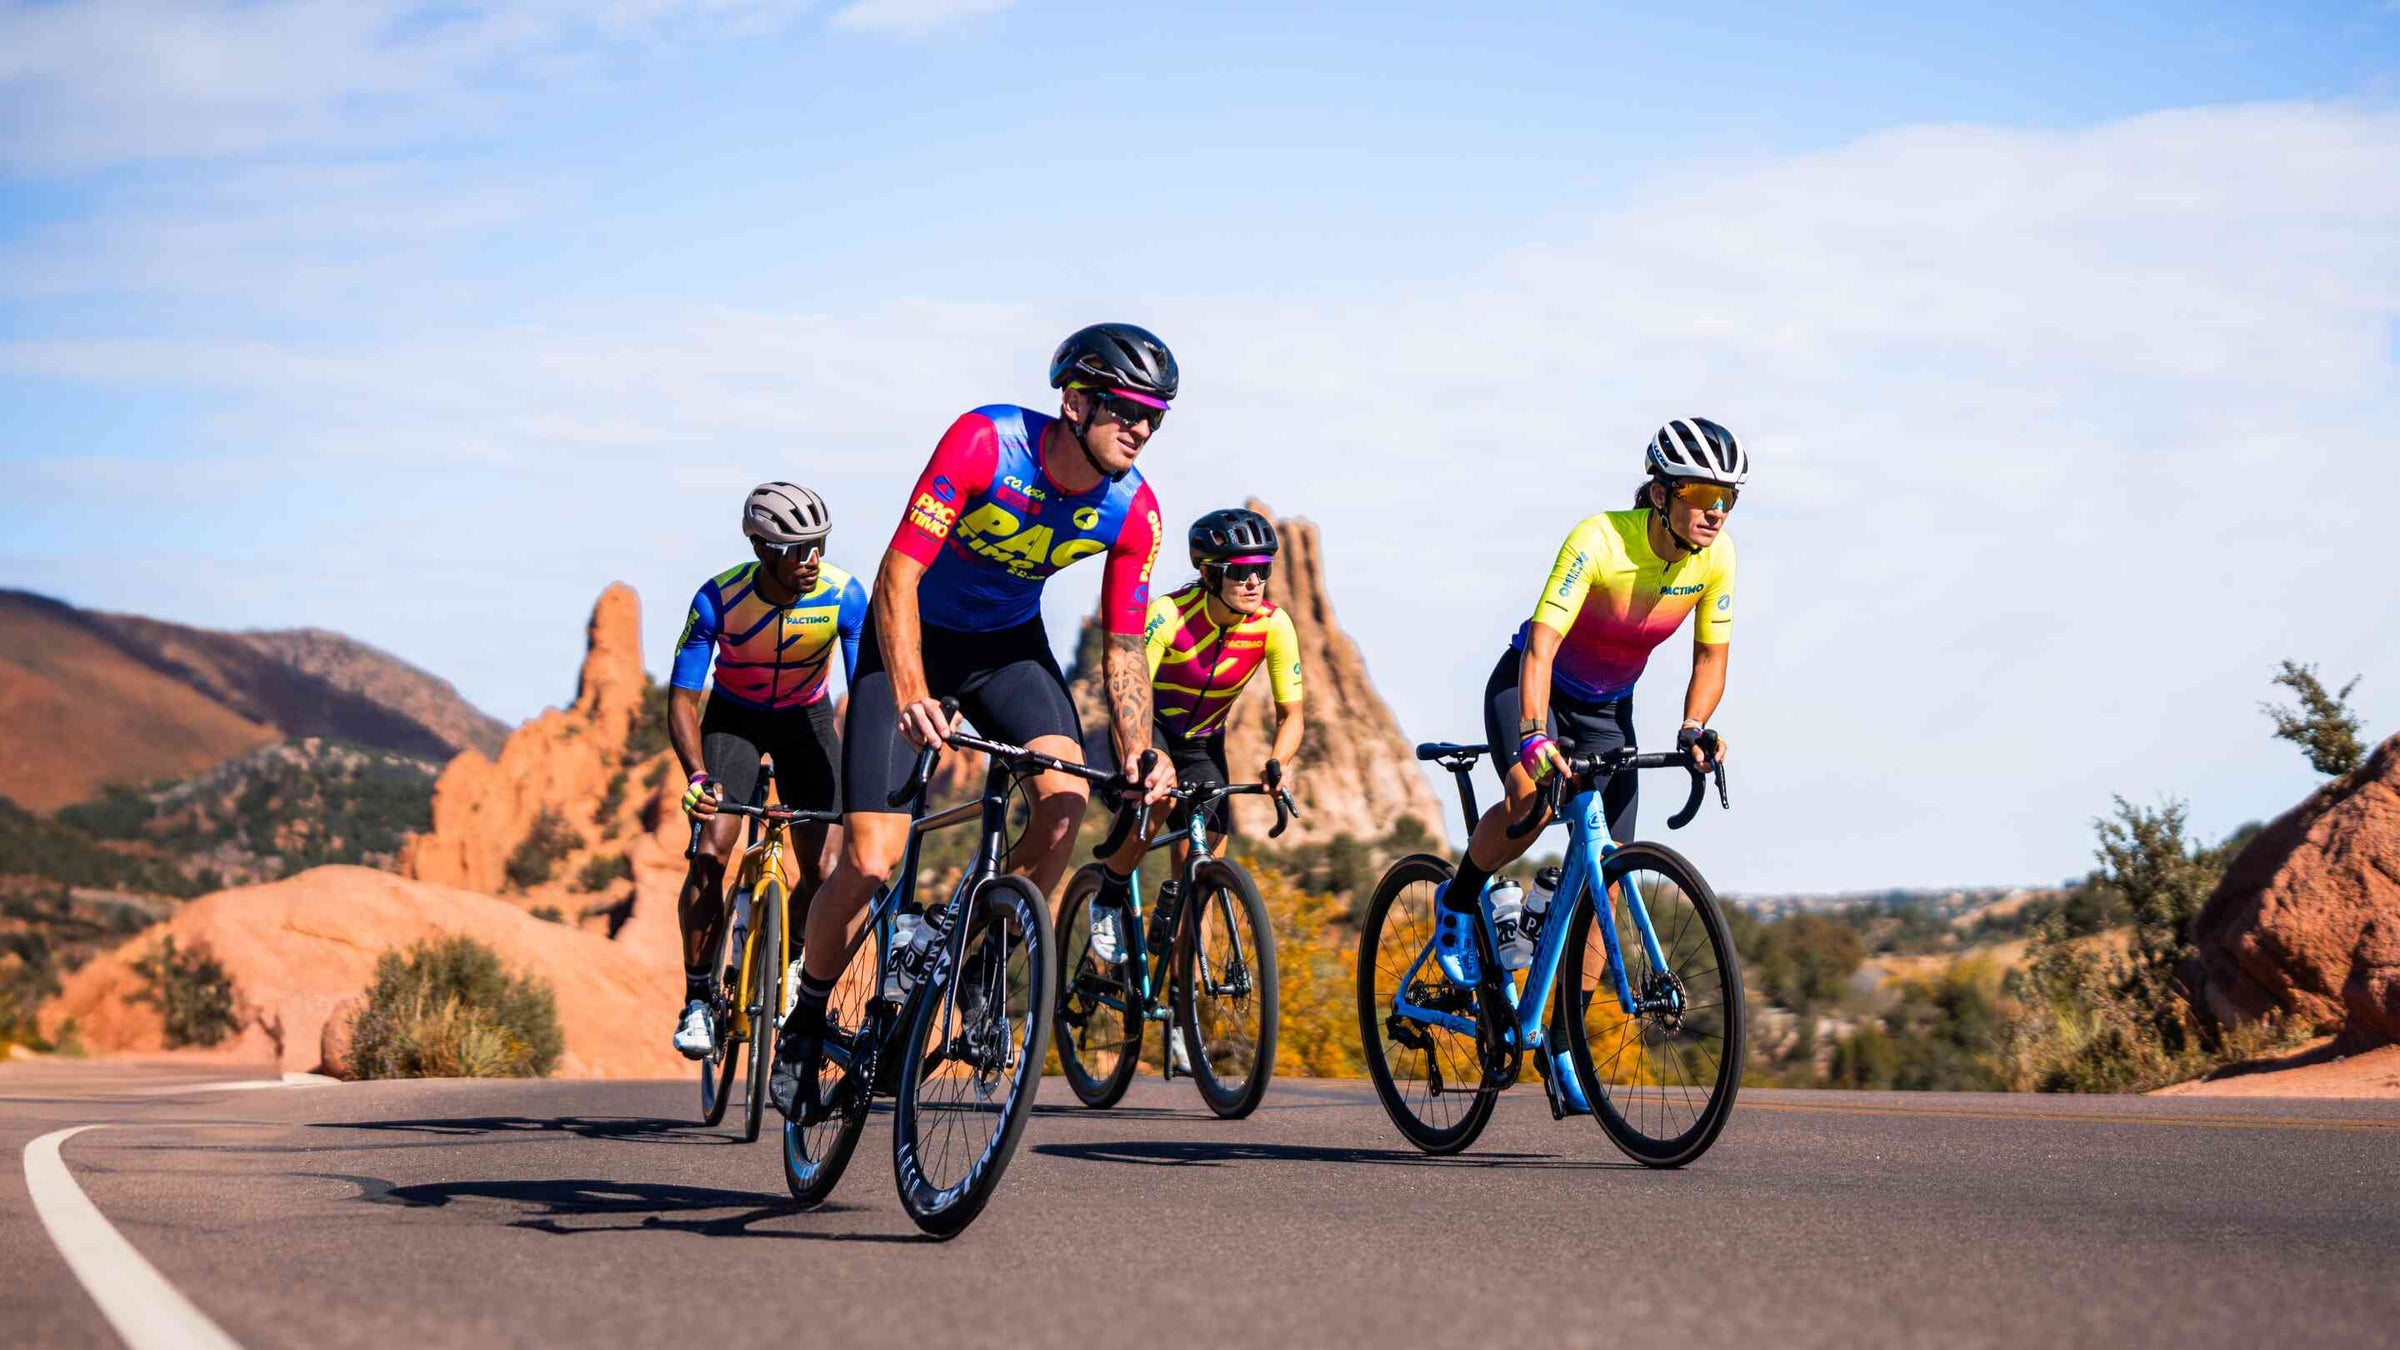 Women's Road Bike Clothing from Indy freelance